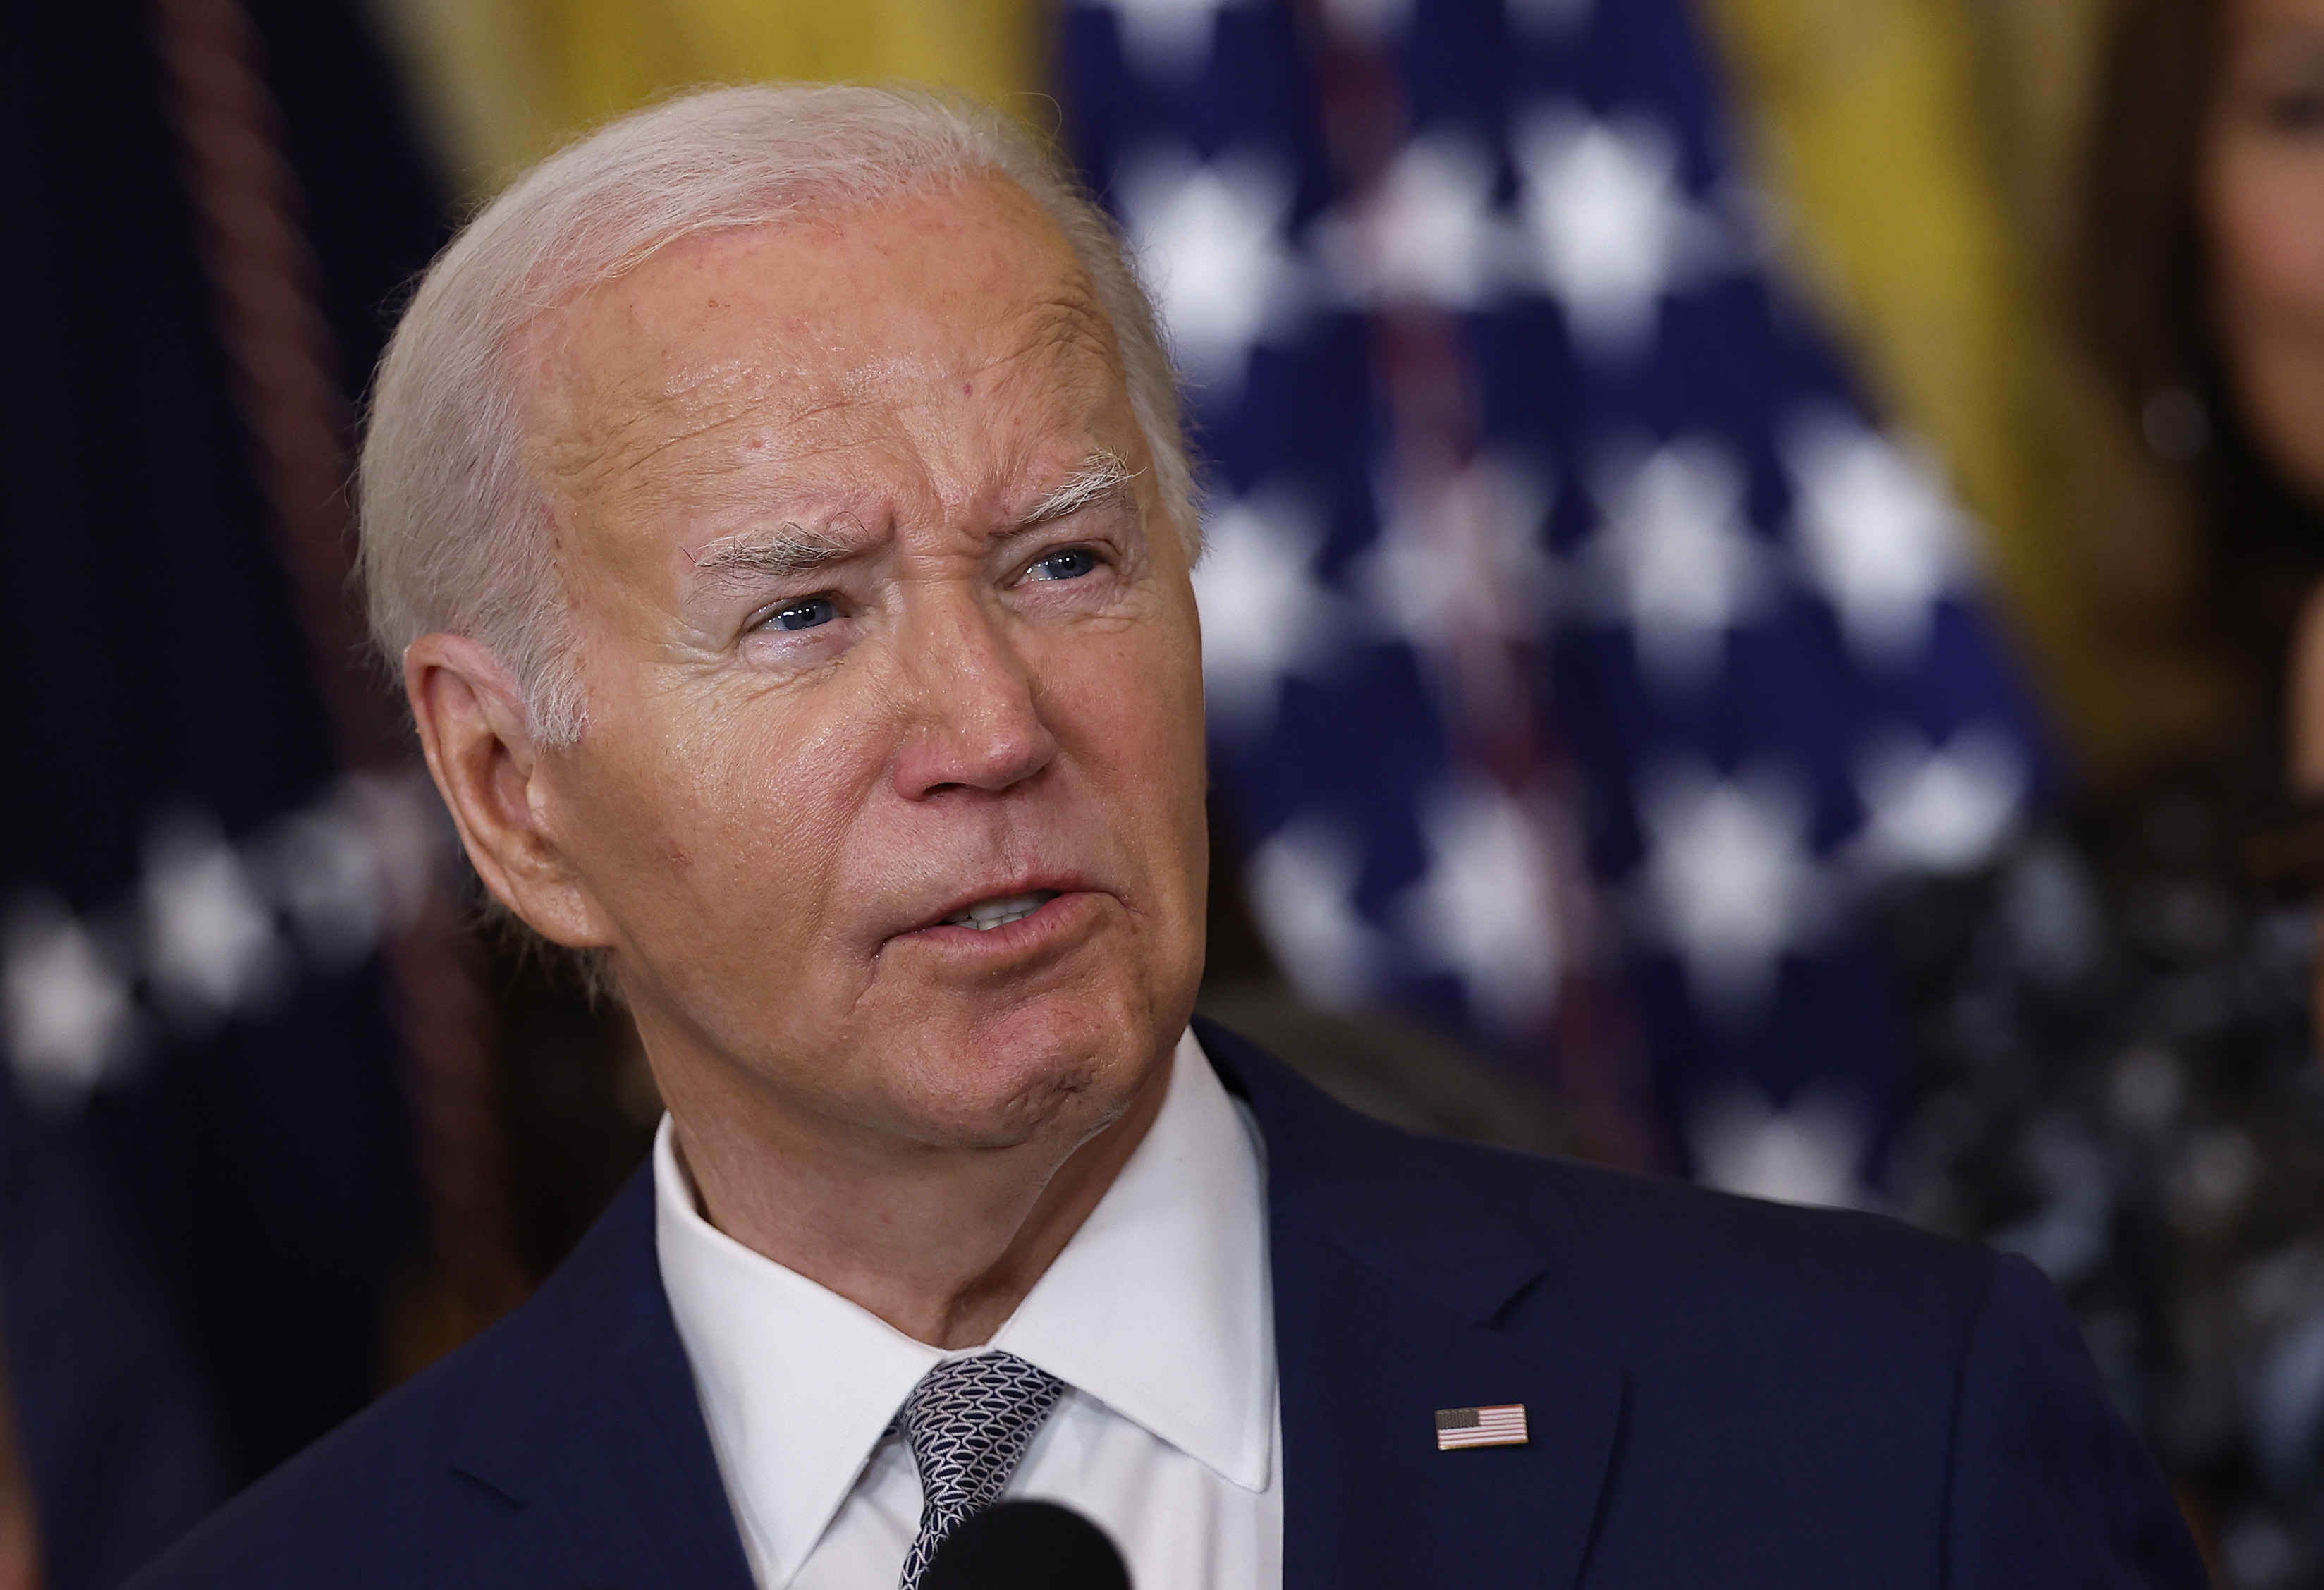 Joe Biden crushing Donald Trump by 23 points among young voters